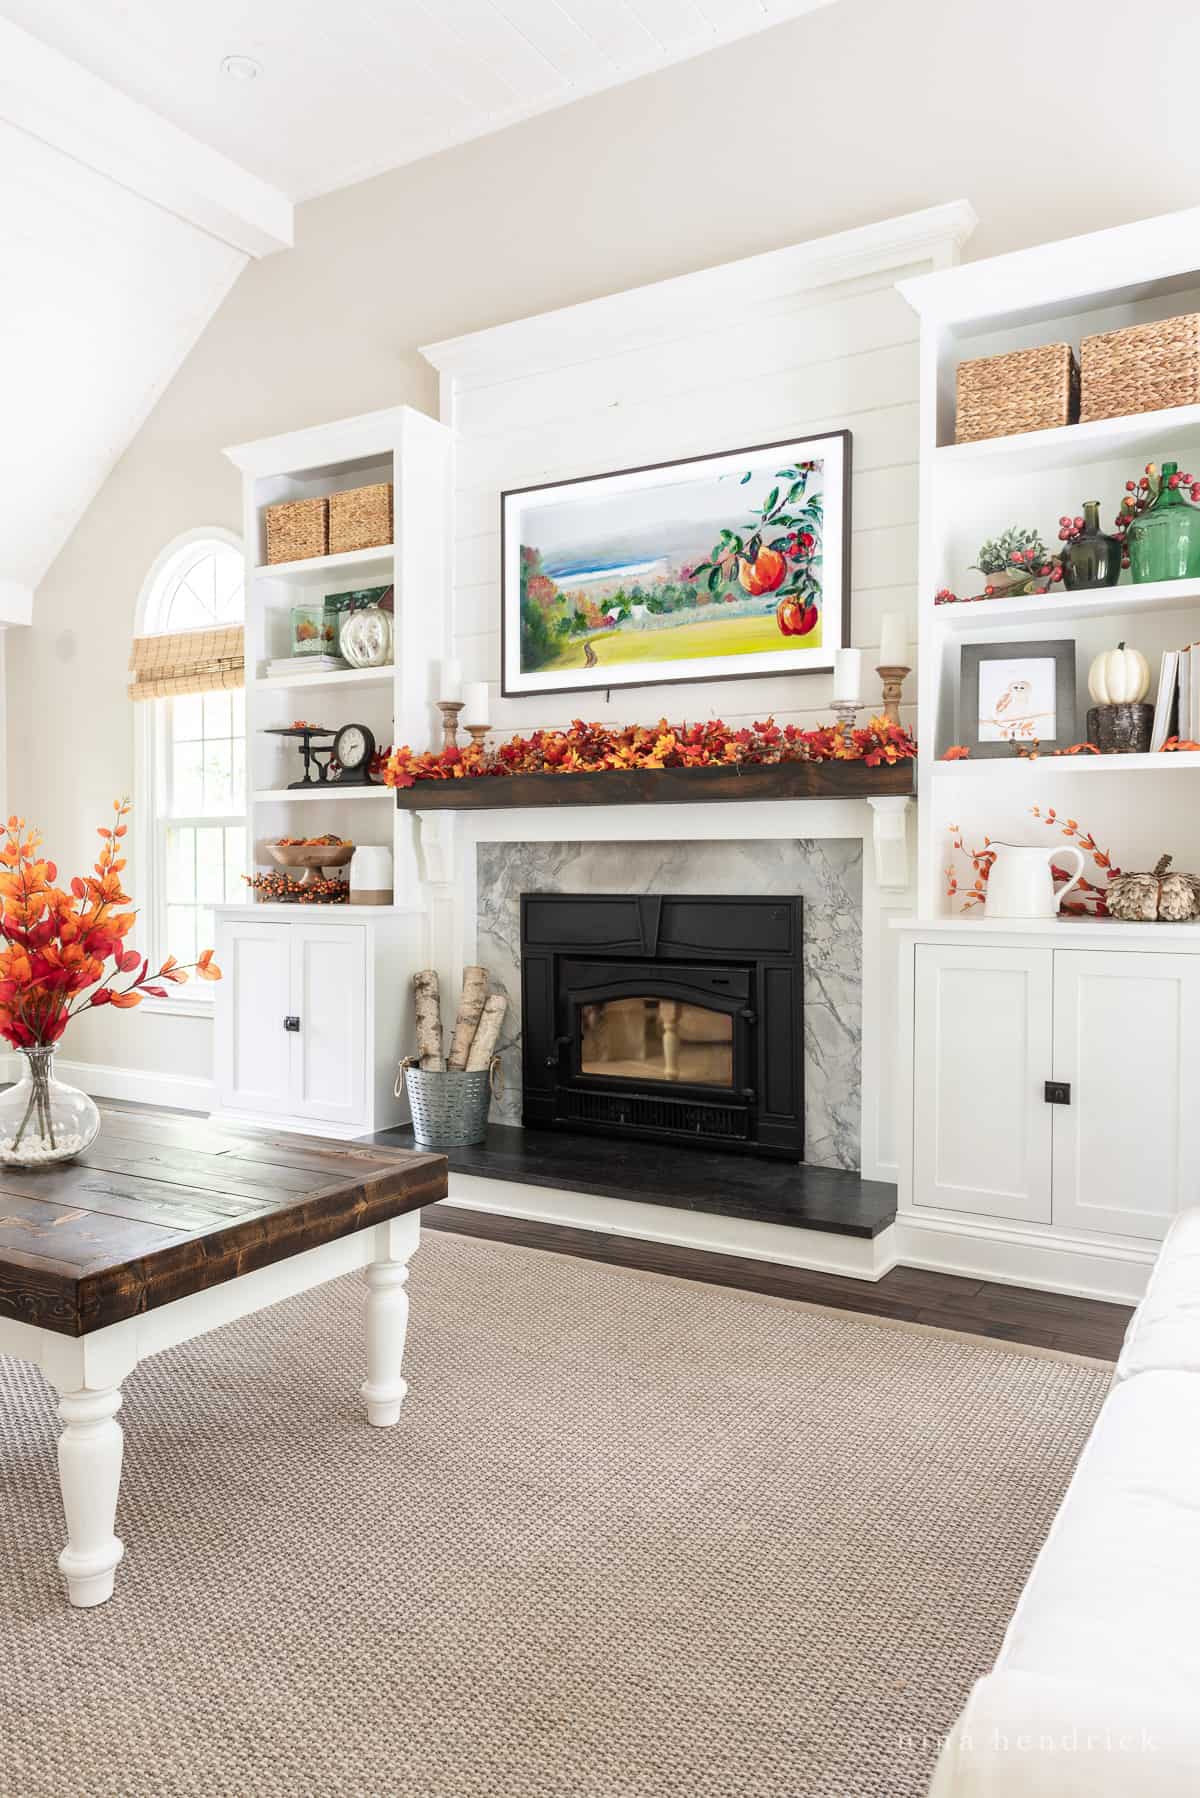 Fall Mantel Decor Ideas in a living room with white built-ins and colorful autumn leaves decorations. 